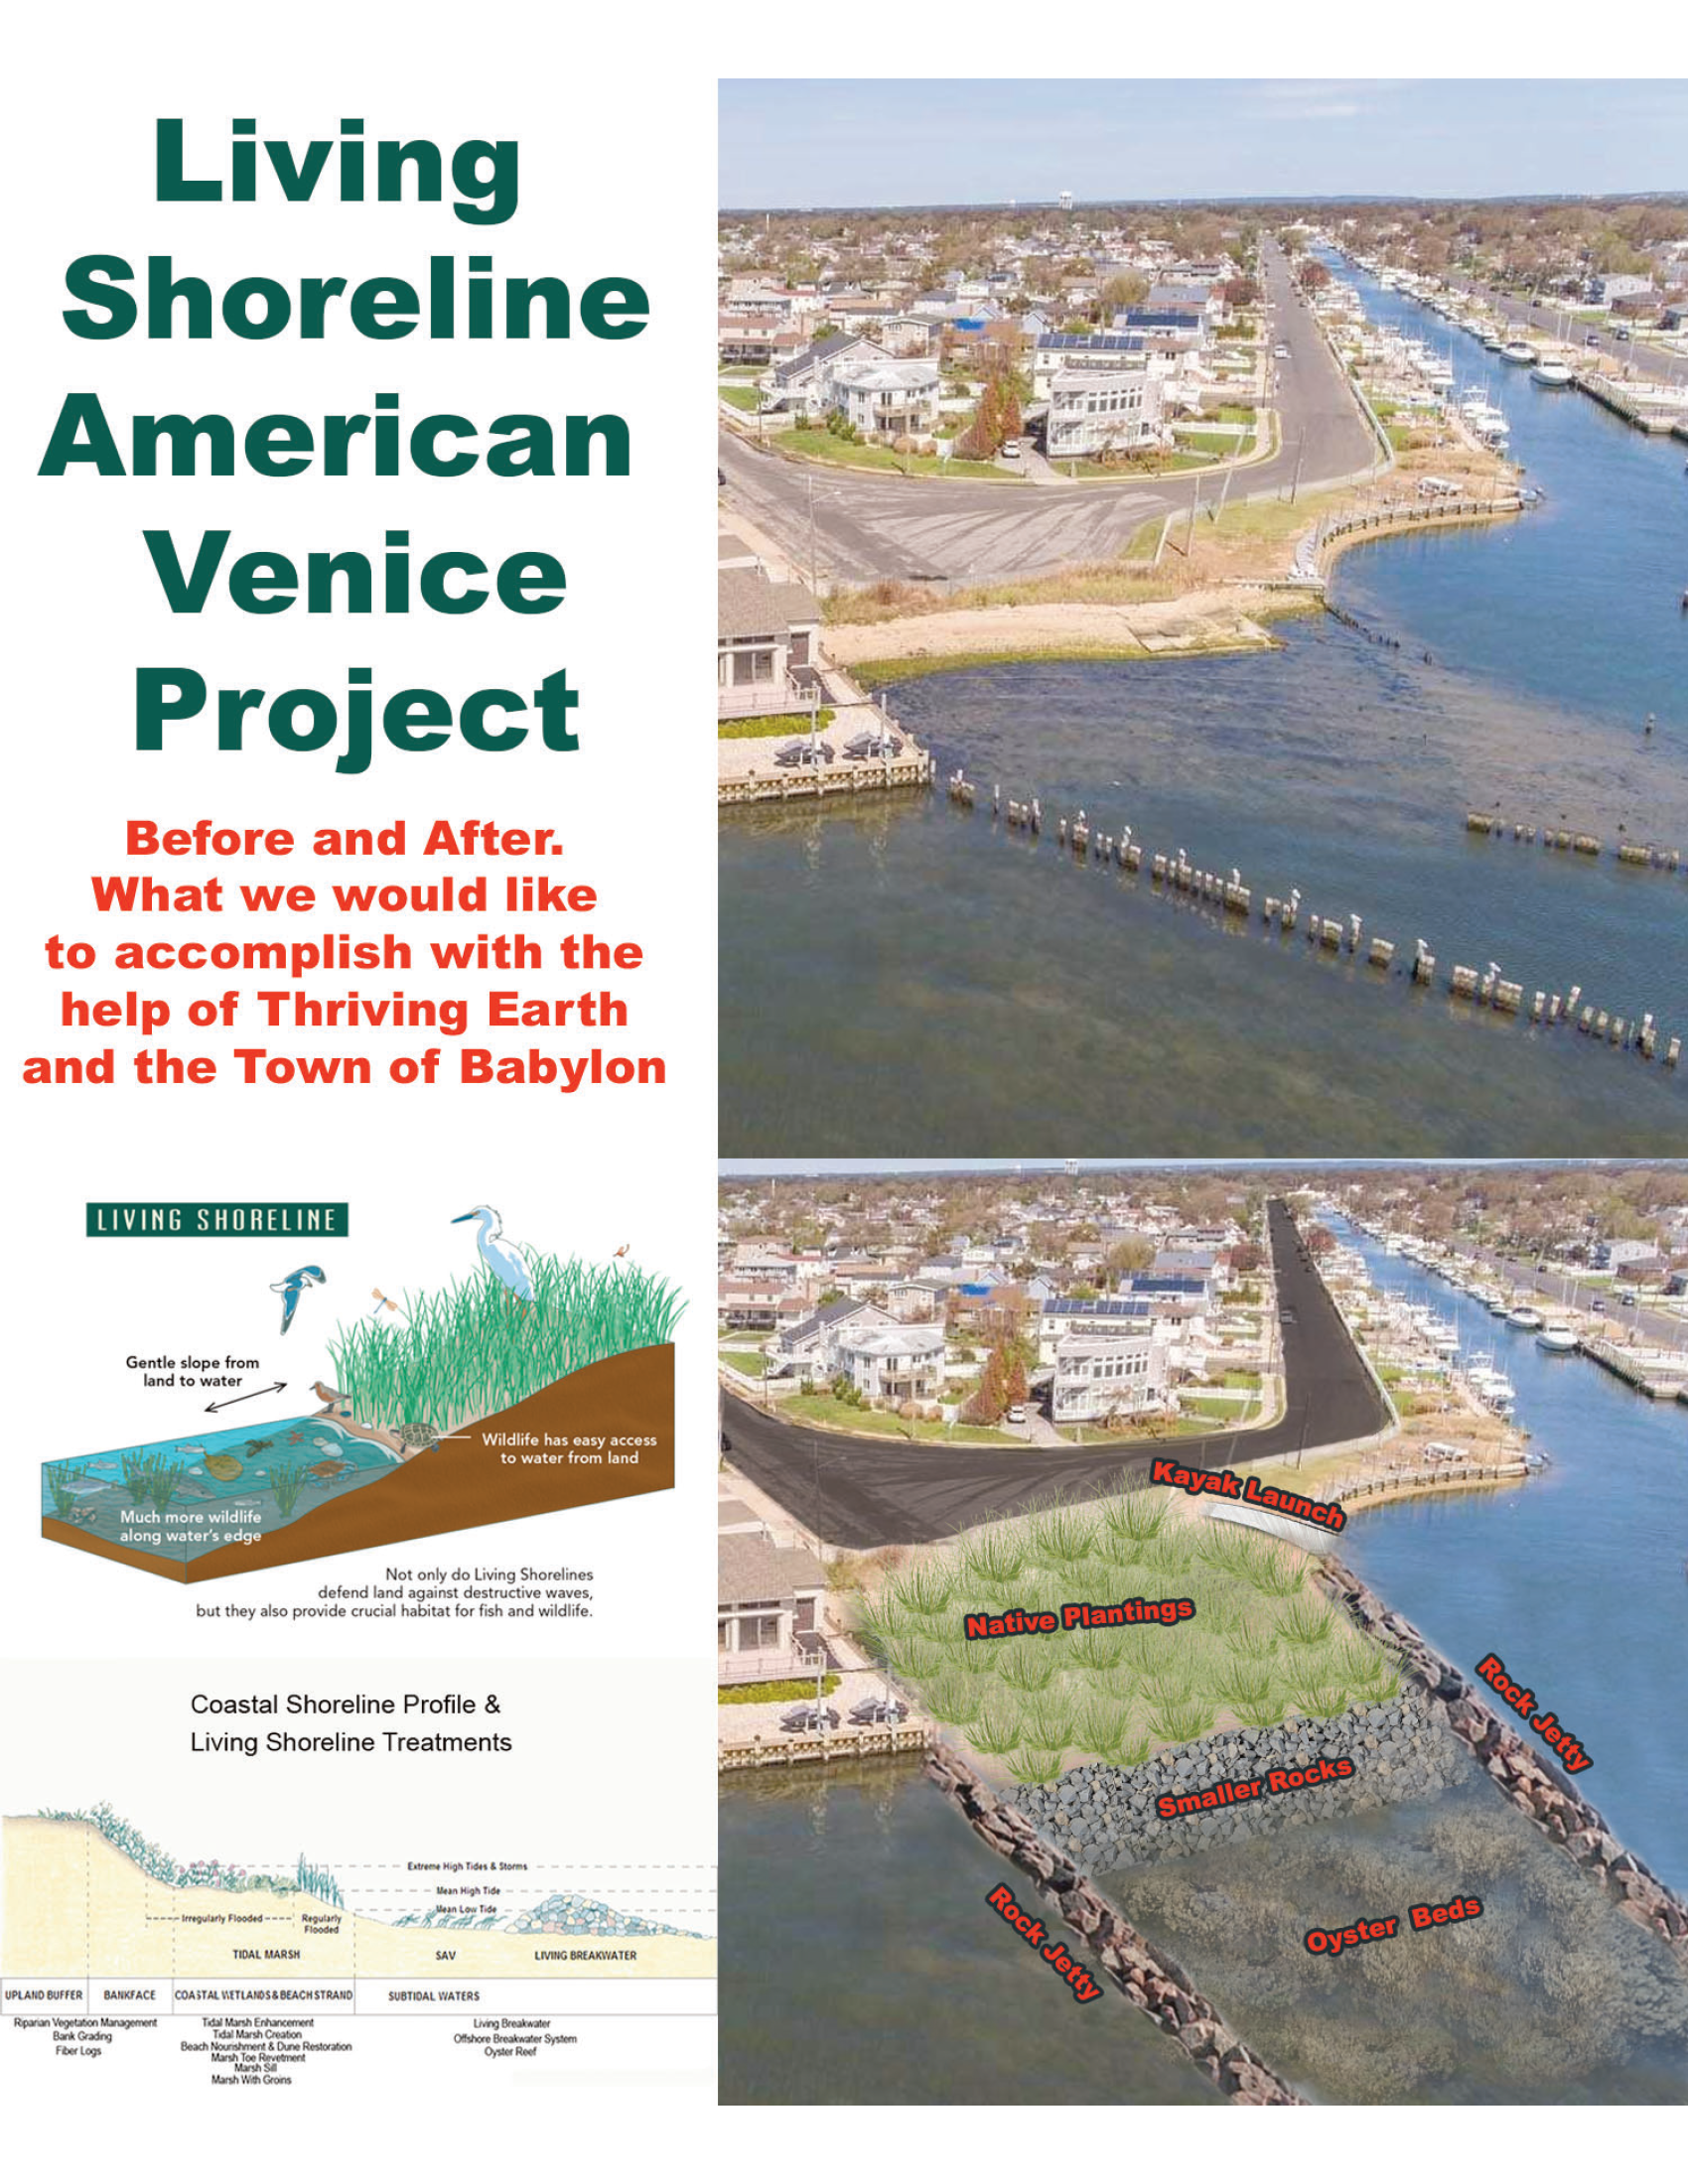 Featured image for the project, Designing a living shoreline to mitigate flooding and increase community resilience